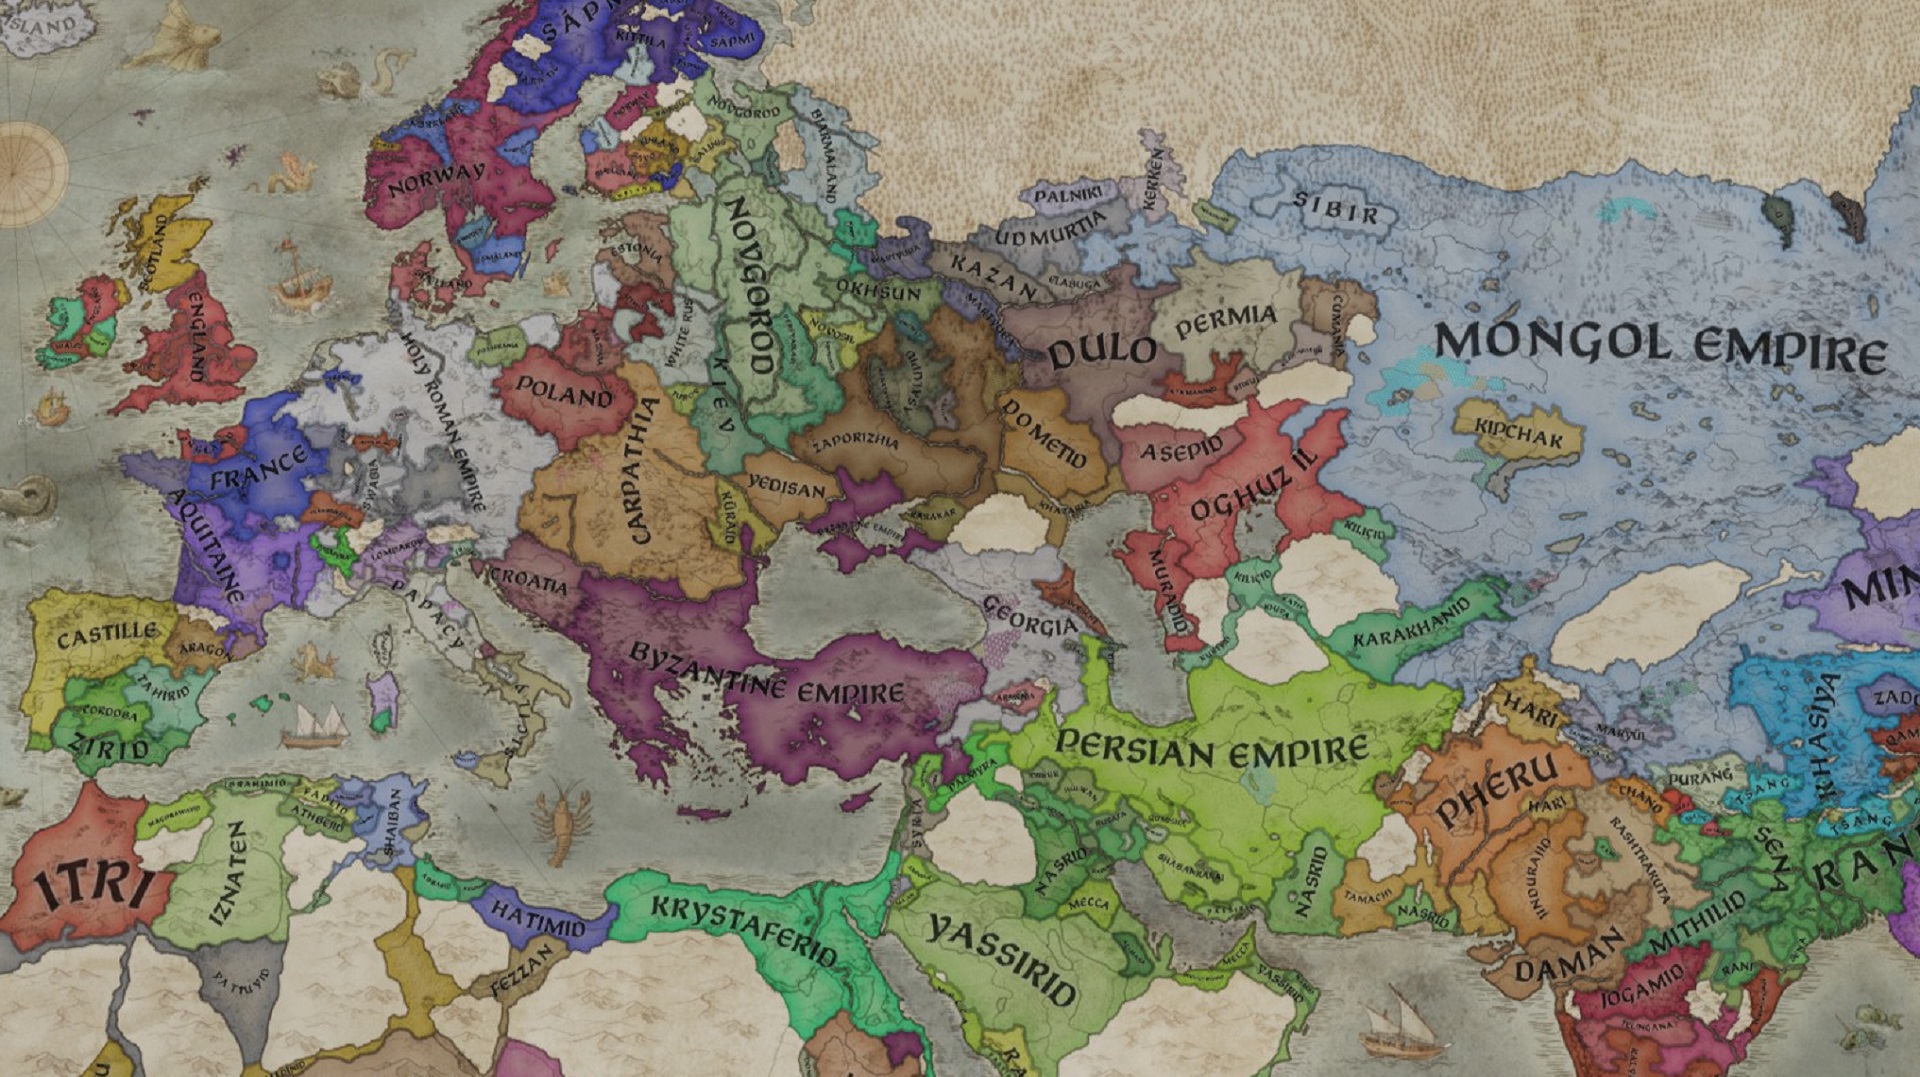 Crusader Kings 3 patch 1.4 ‘Azure’ improves warfare, traits, and interactions